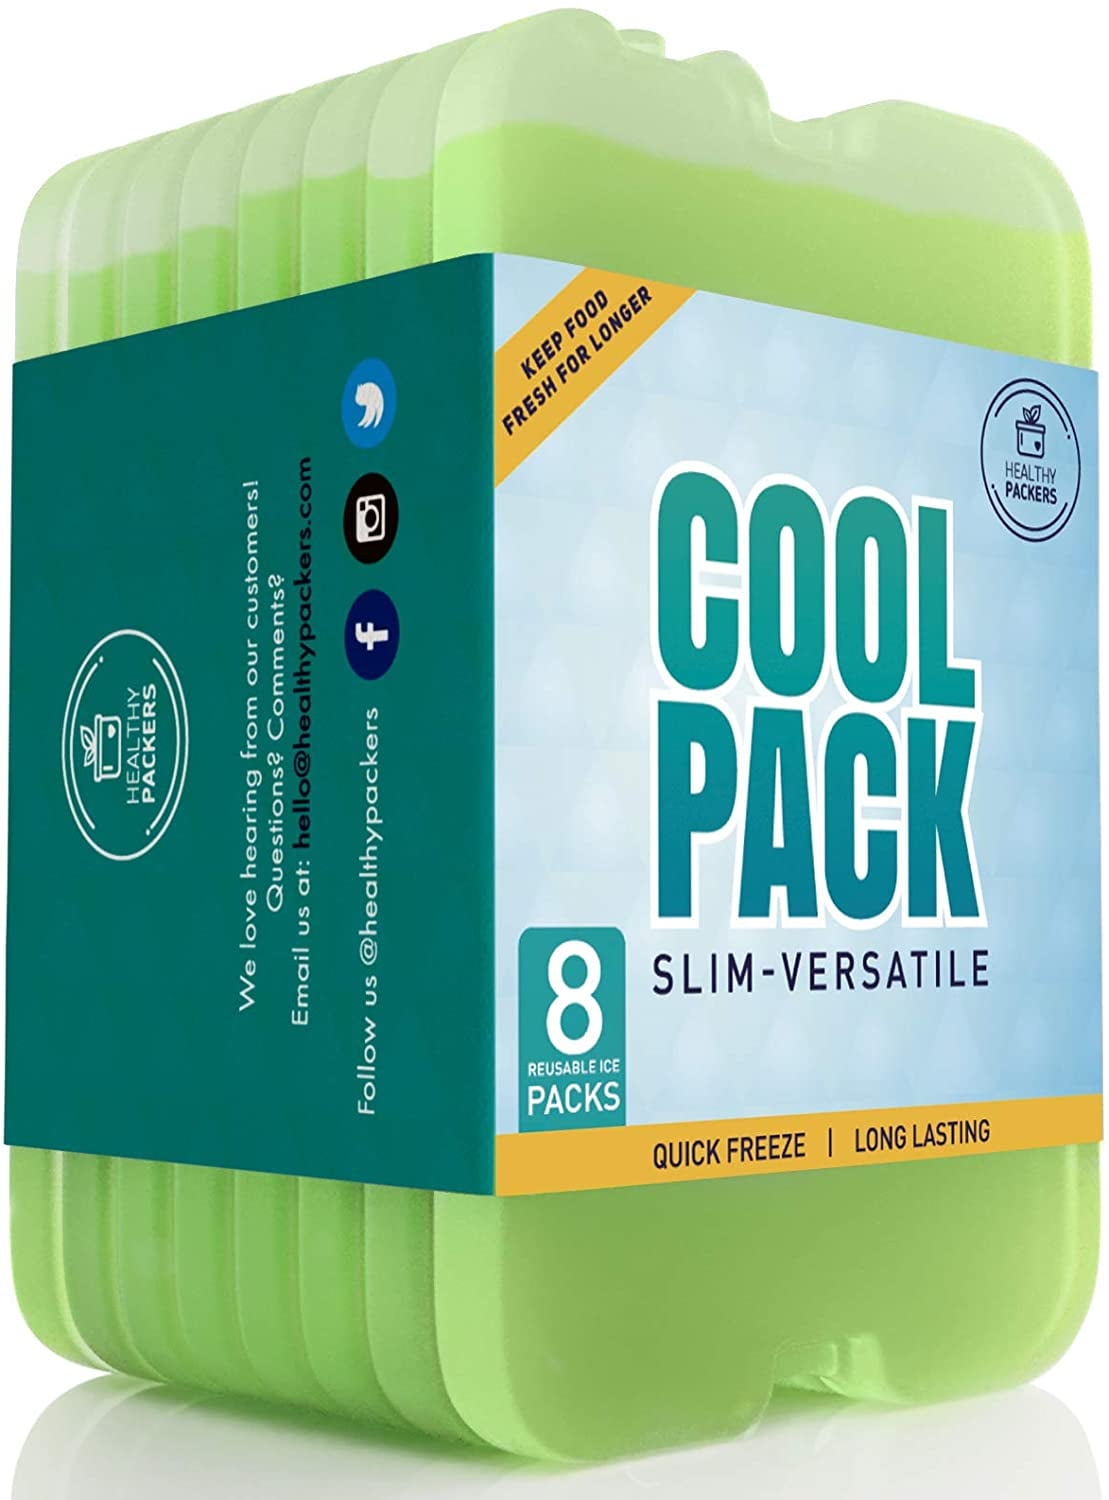 Set of 6 Healthy Packers Ice Pack for Lunch Box Freezer Packs 